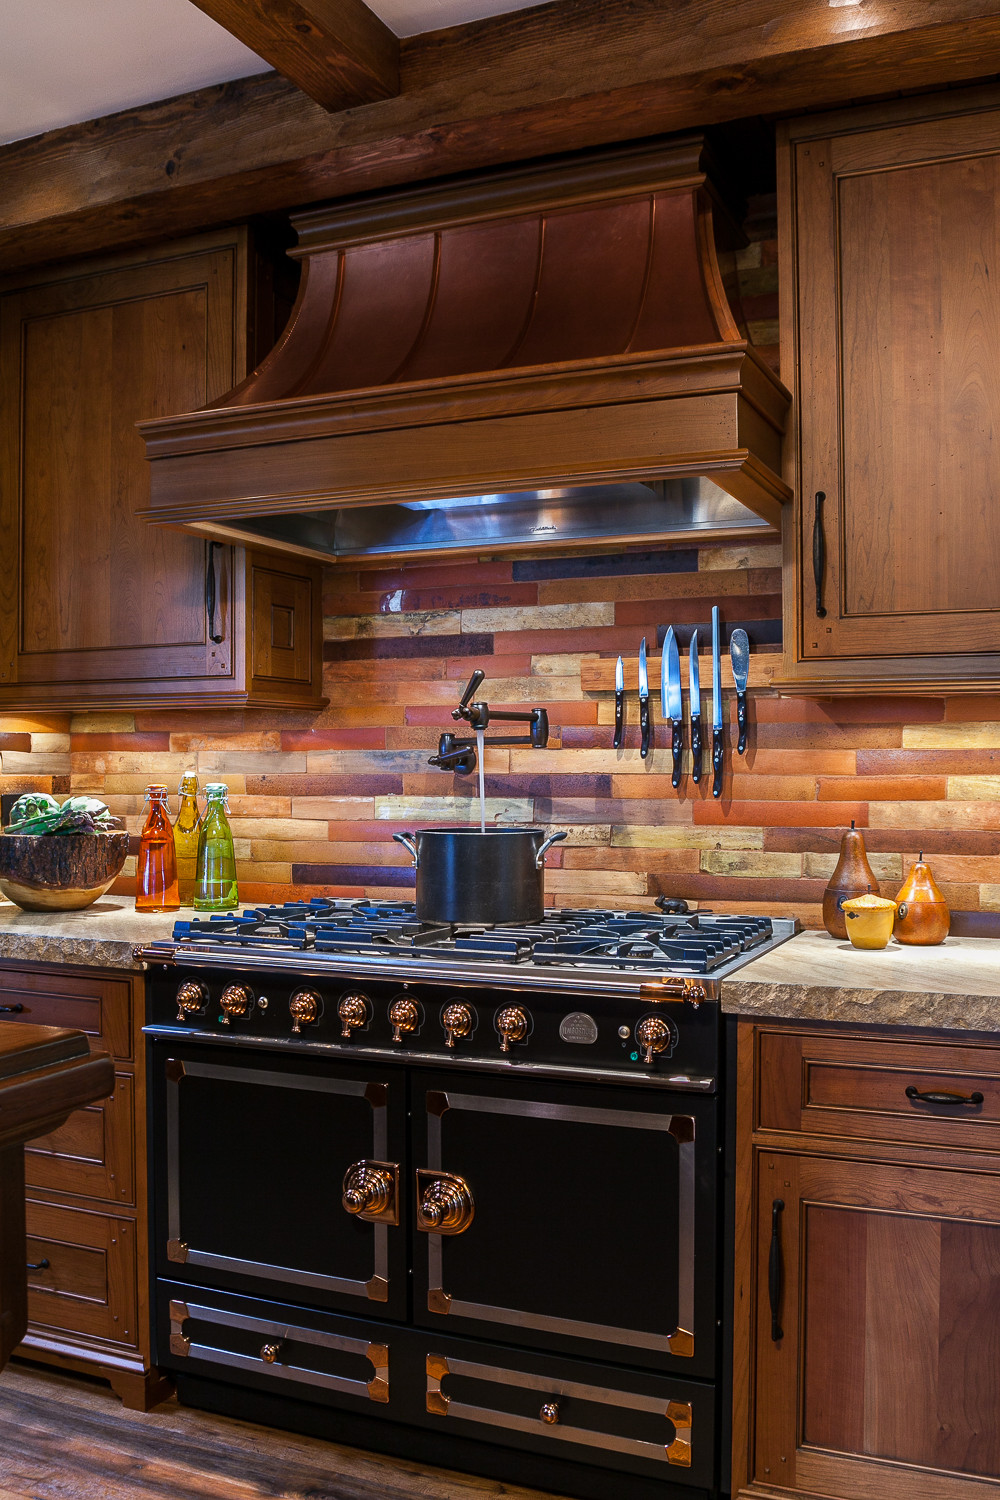 75 Beautiful Kitchen With Dark Wood Cabinets And Slate Backsplash Pictures Ideas April 2021 Houzz